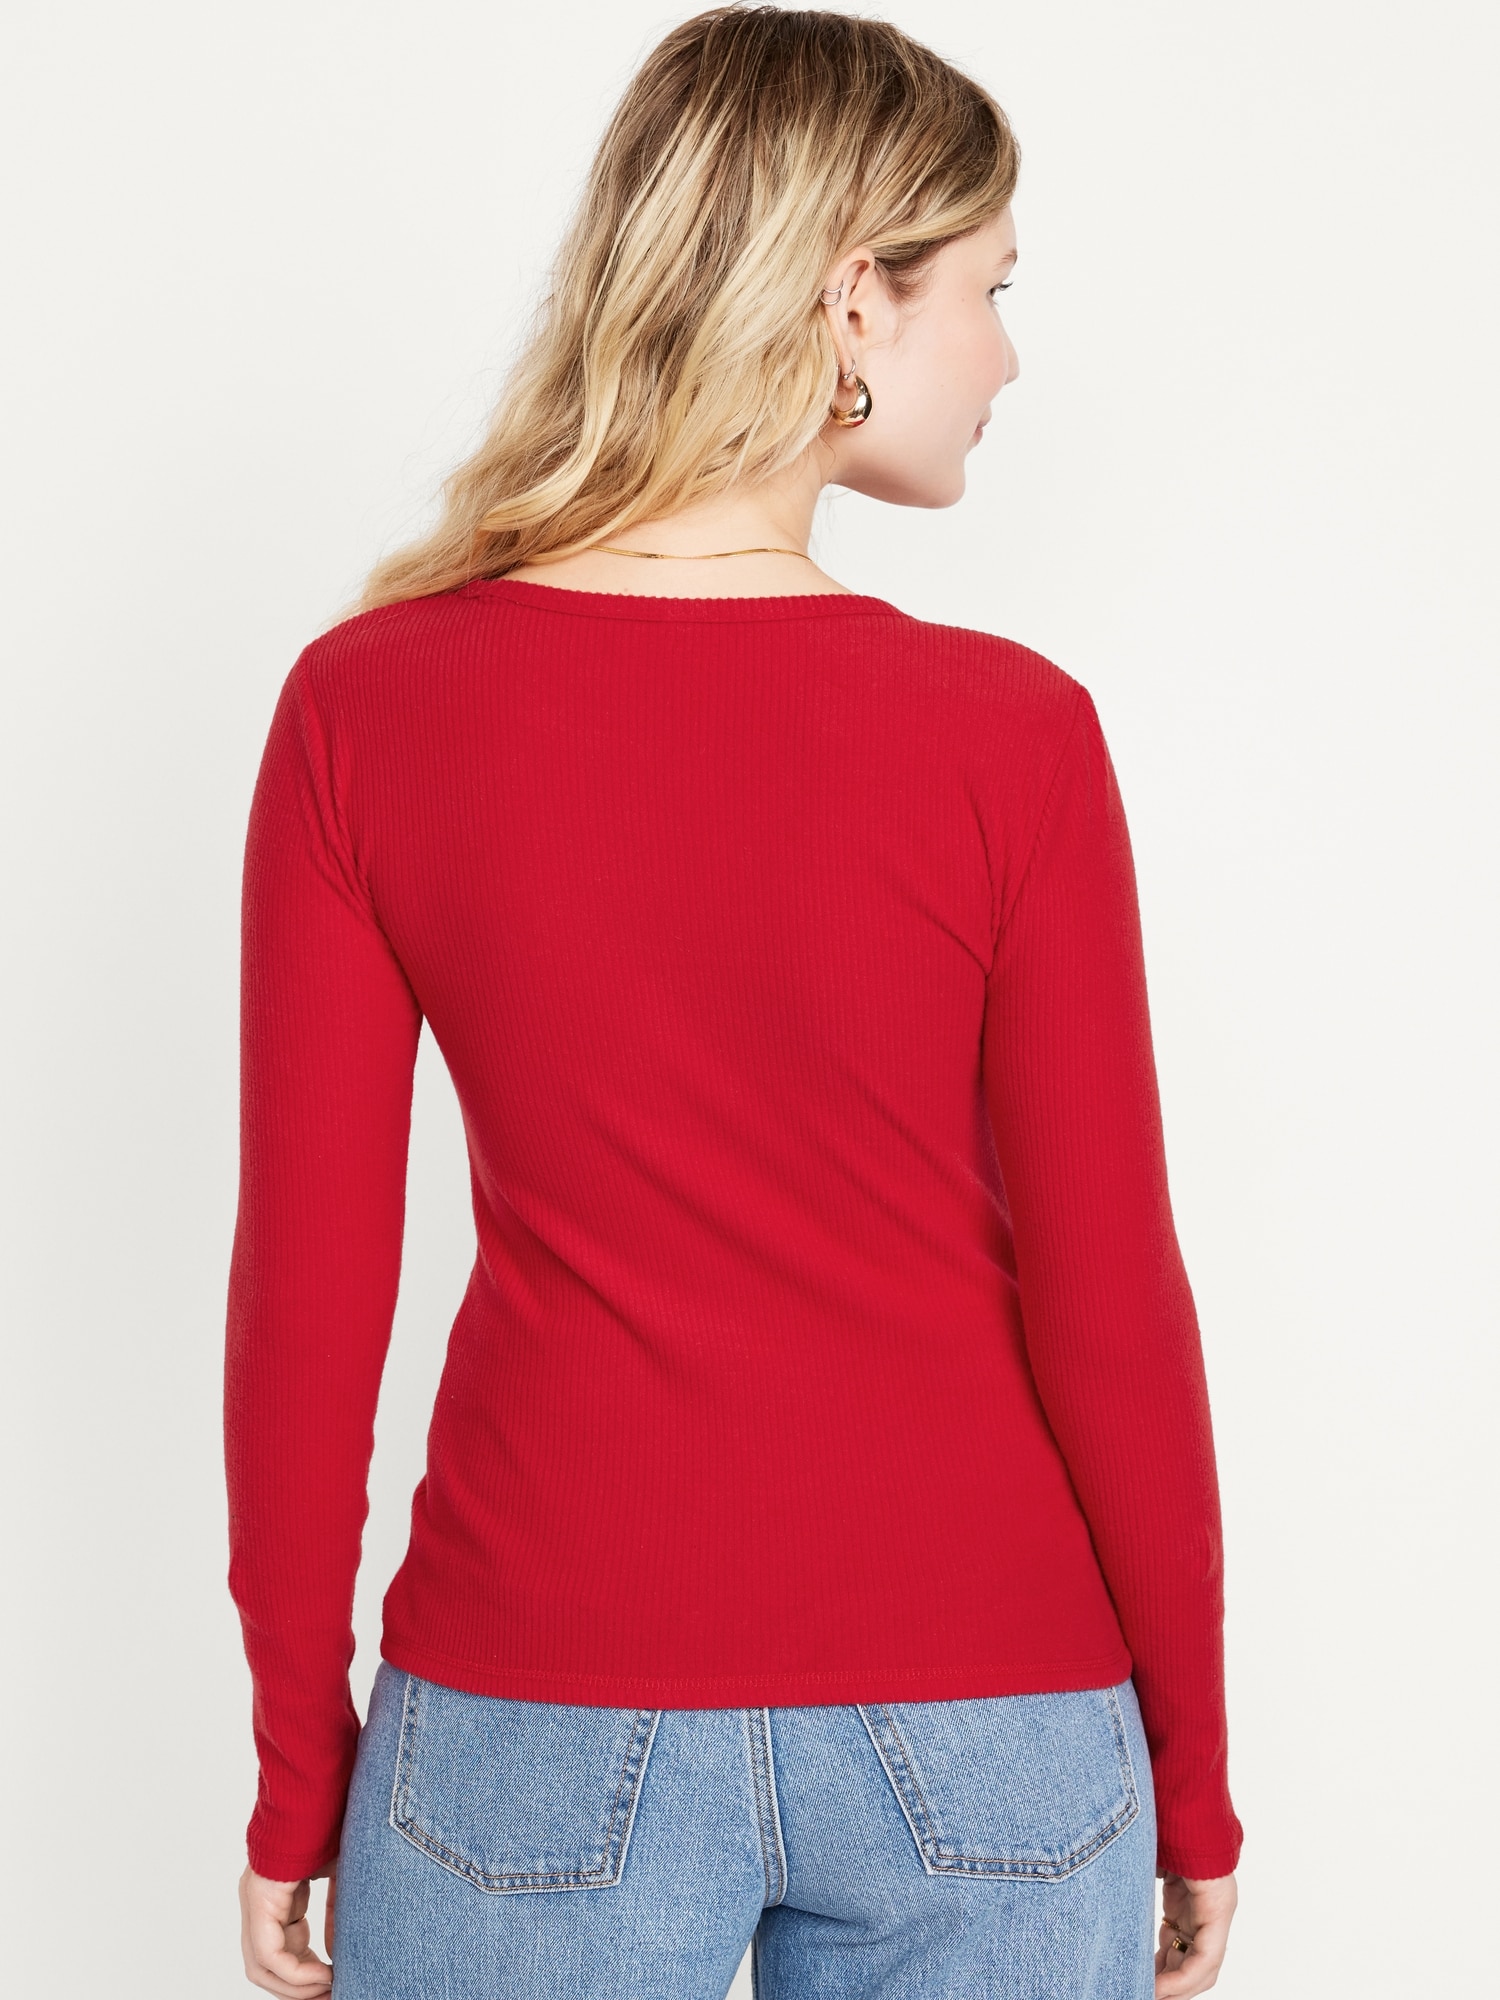 Womens Long Sleeve T Shirt With Super-Soft Stretch Fabric Round Neck  T-Shirts 